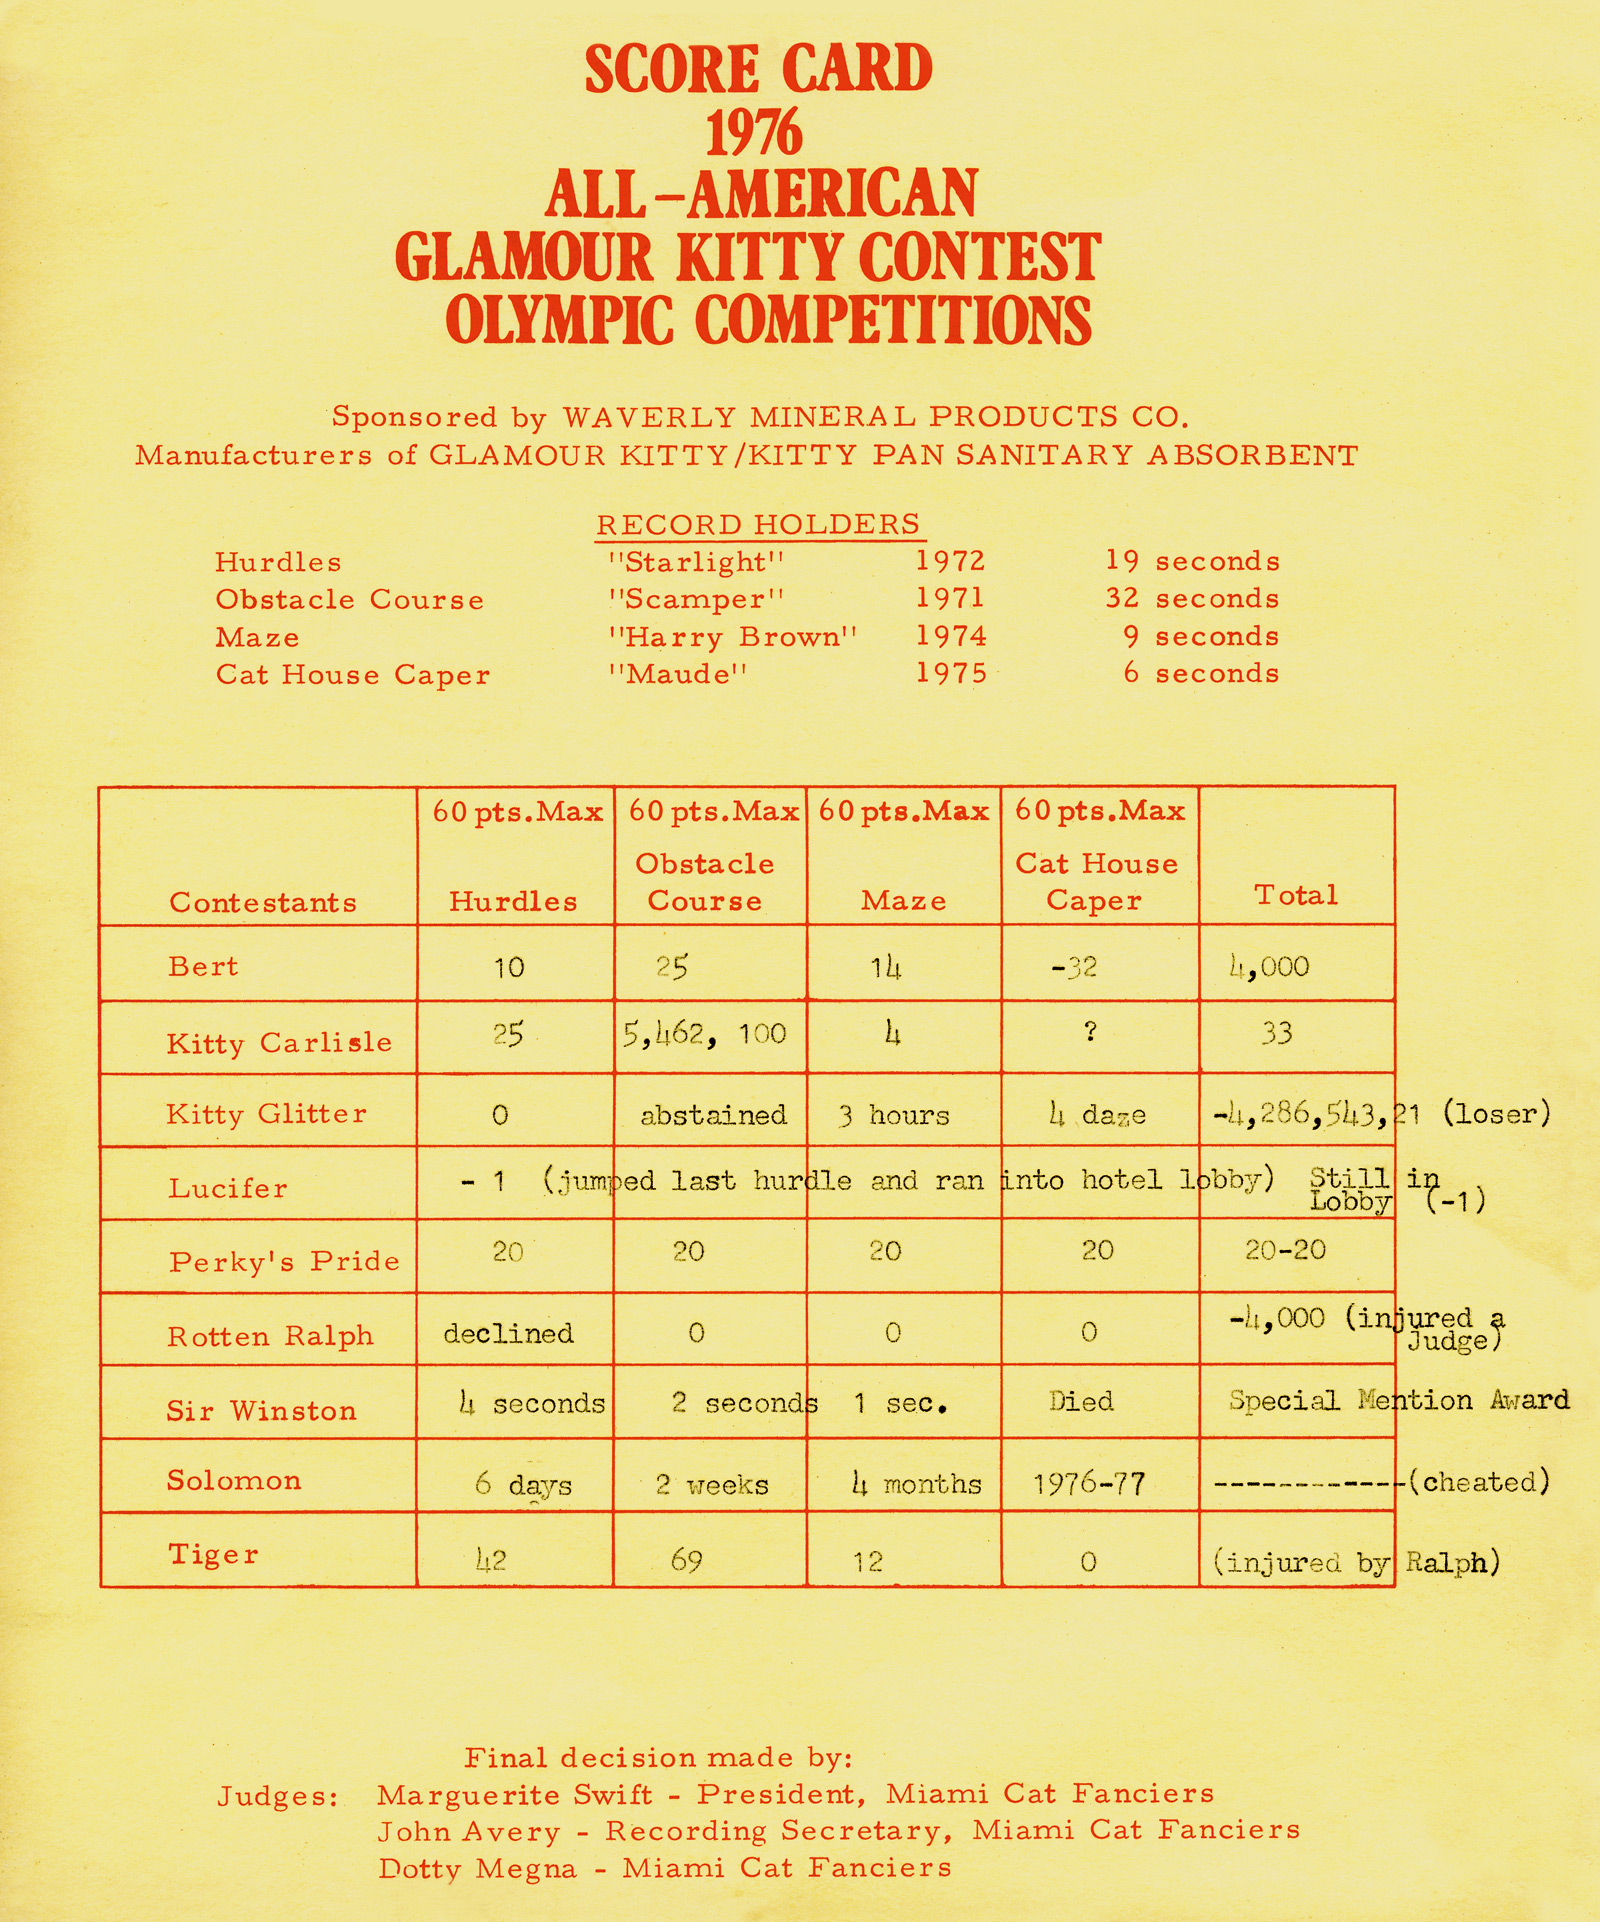 An image of a nineteen seventy six score card from the All-American Glamour Kitty Contest Olympic Competitions. On the card is a chart listing the various feline contestants and their performance in the athletic events. The results are humorous, with 